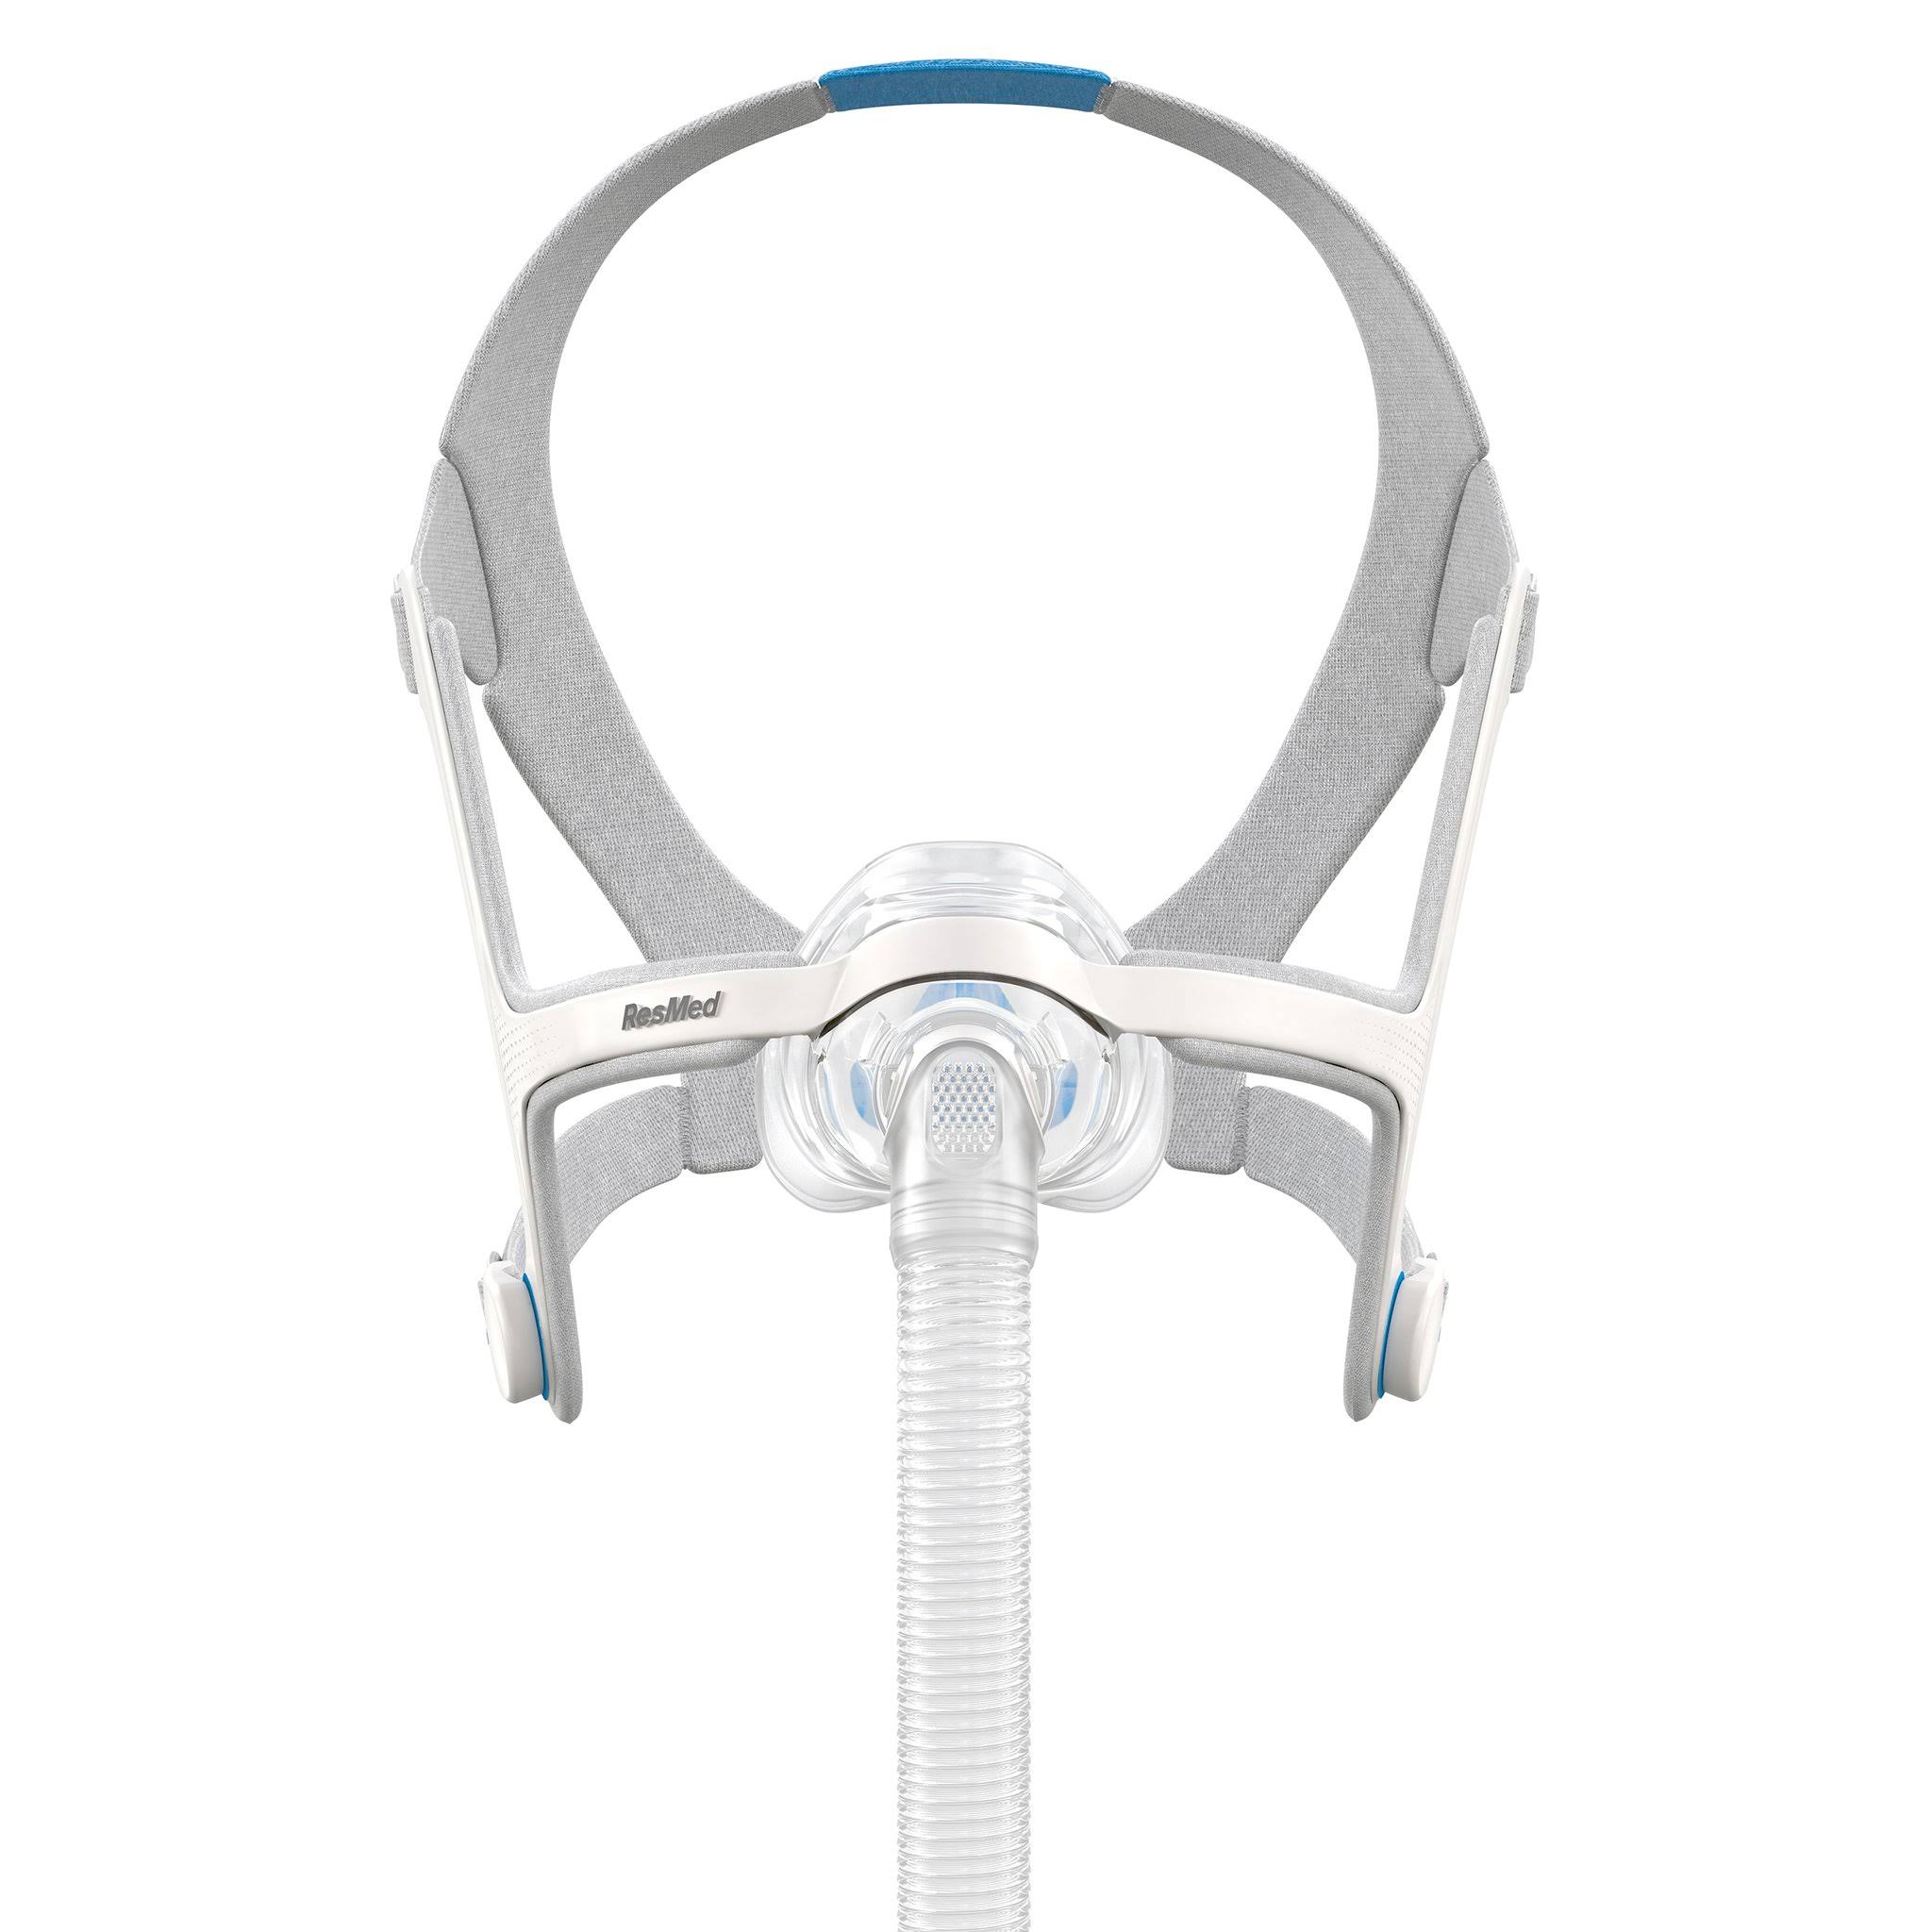 ResMed AirFit N20 Nasal CPAP Mask with Headgear - Large